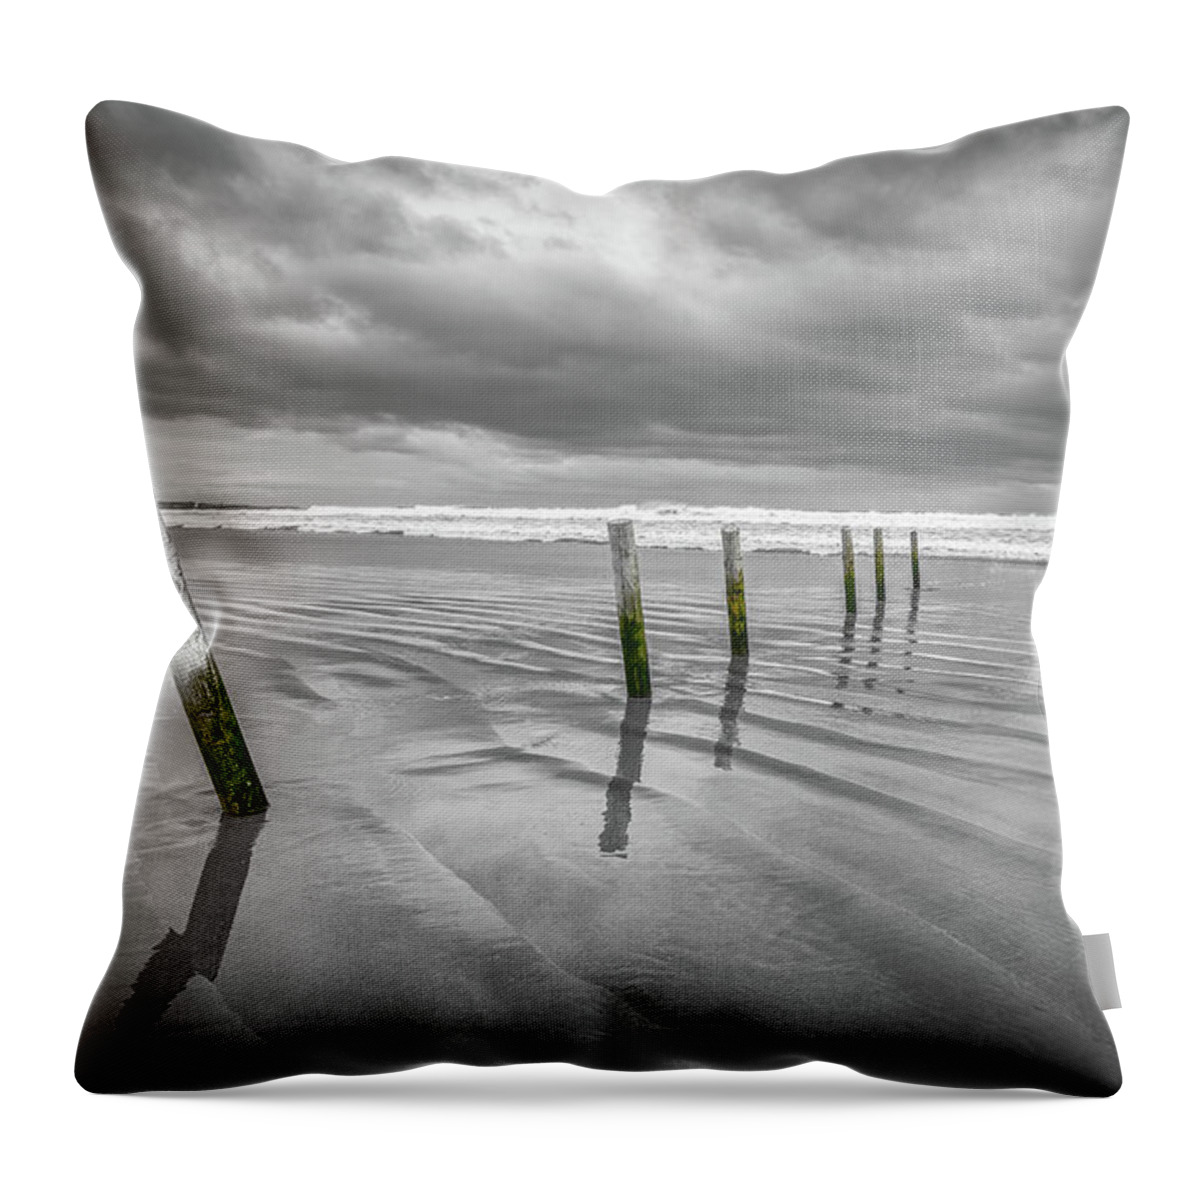 Posts Throw Pillow featuring the photograph Castlerock Beach Posts by Nigel R Bell